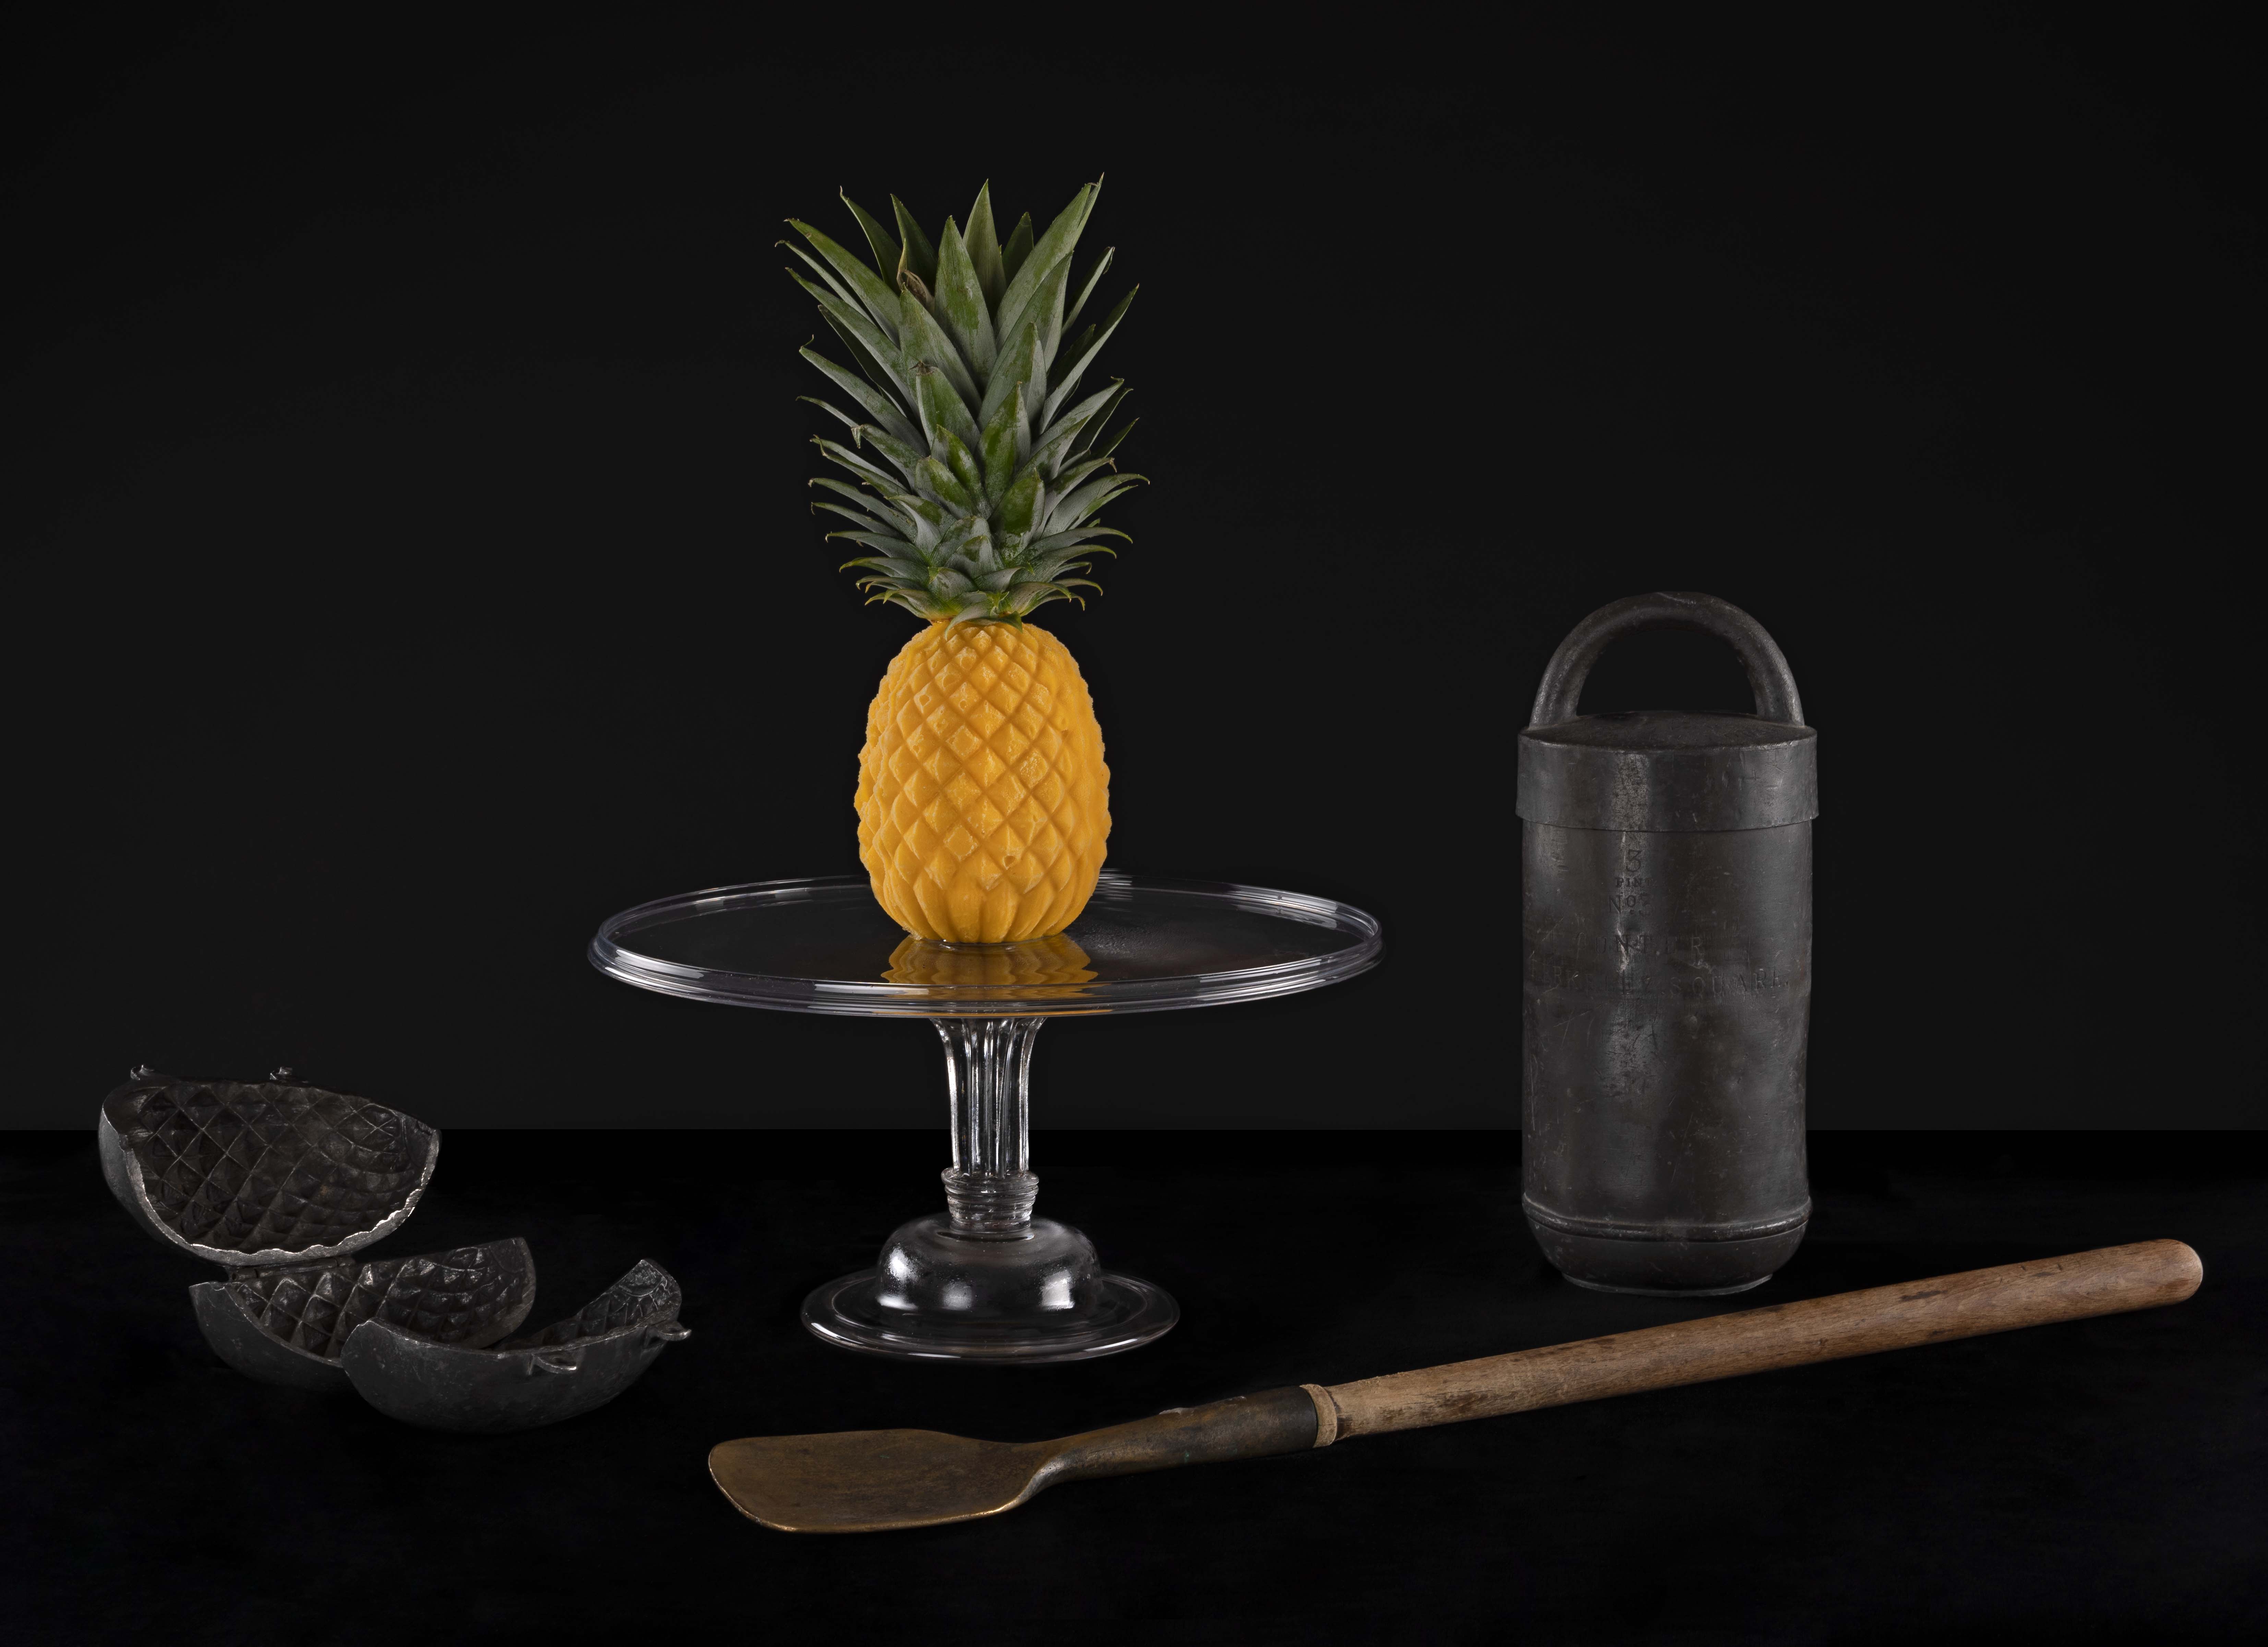 Ice cream pineapple made by Ivan Day, using an eighteenth century English pewter mould.